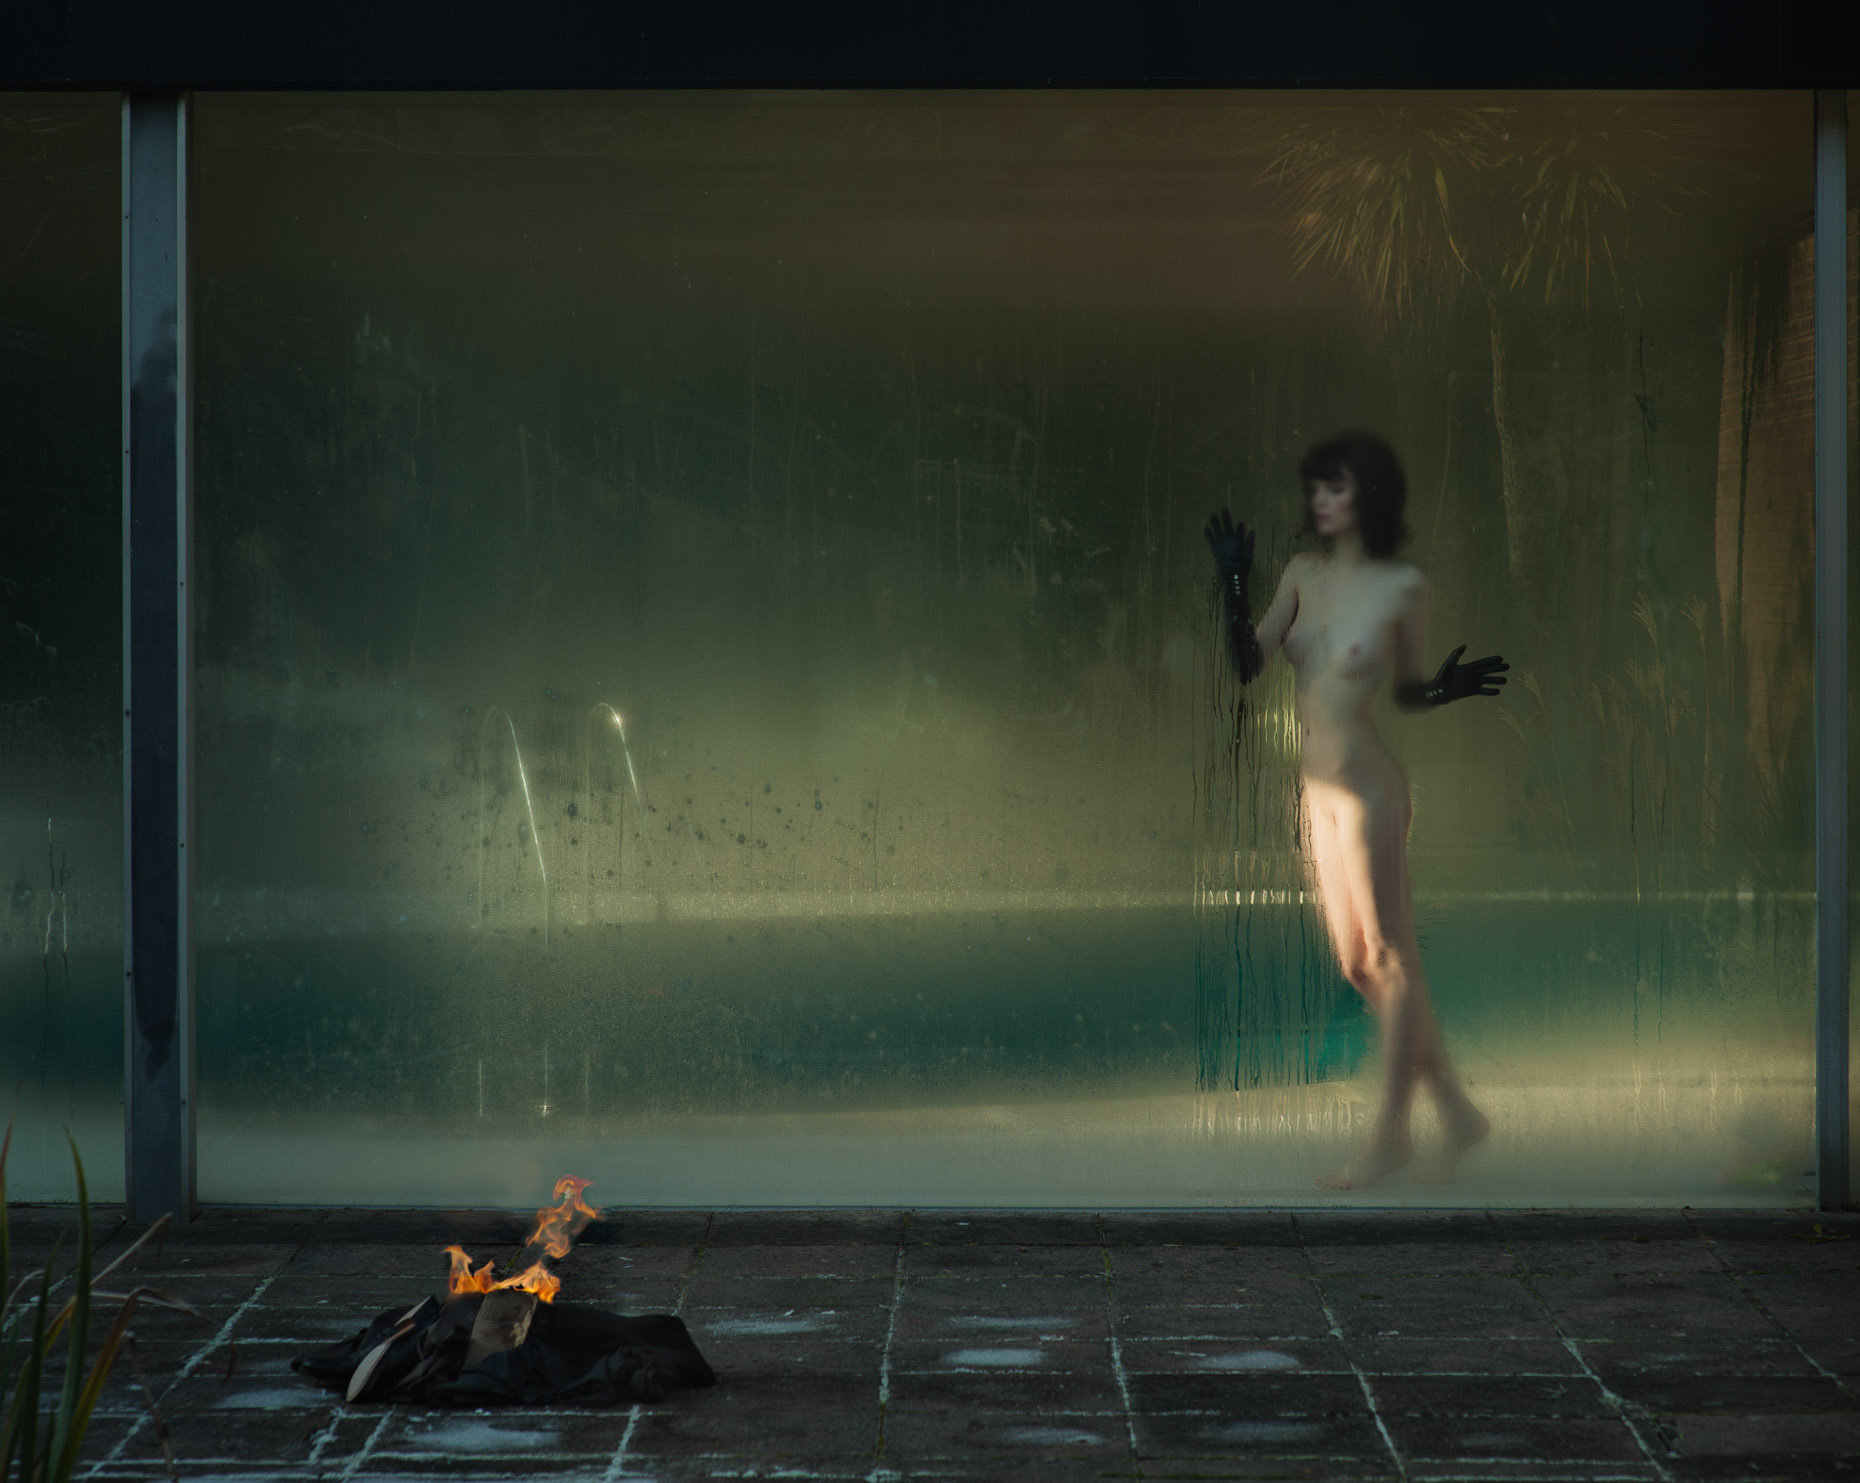 Dark haired model naked behind steamed glass window in a swimming pool photographed by Marc Rogoff (Bambi Magazine)